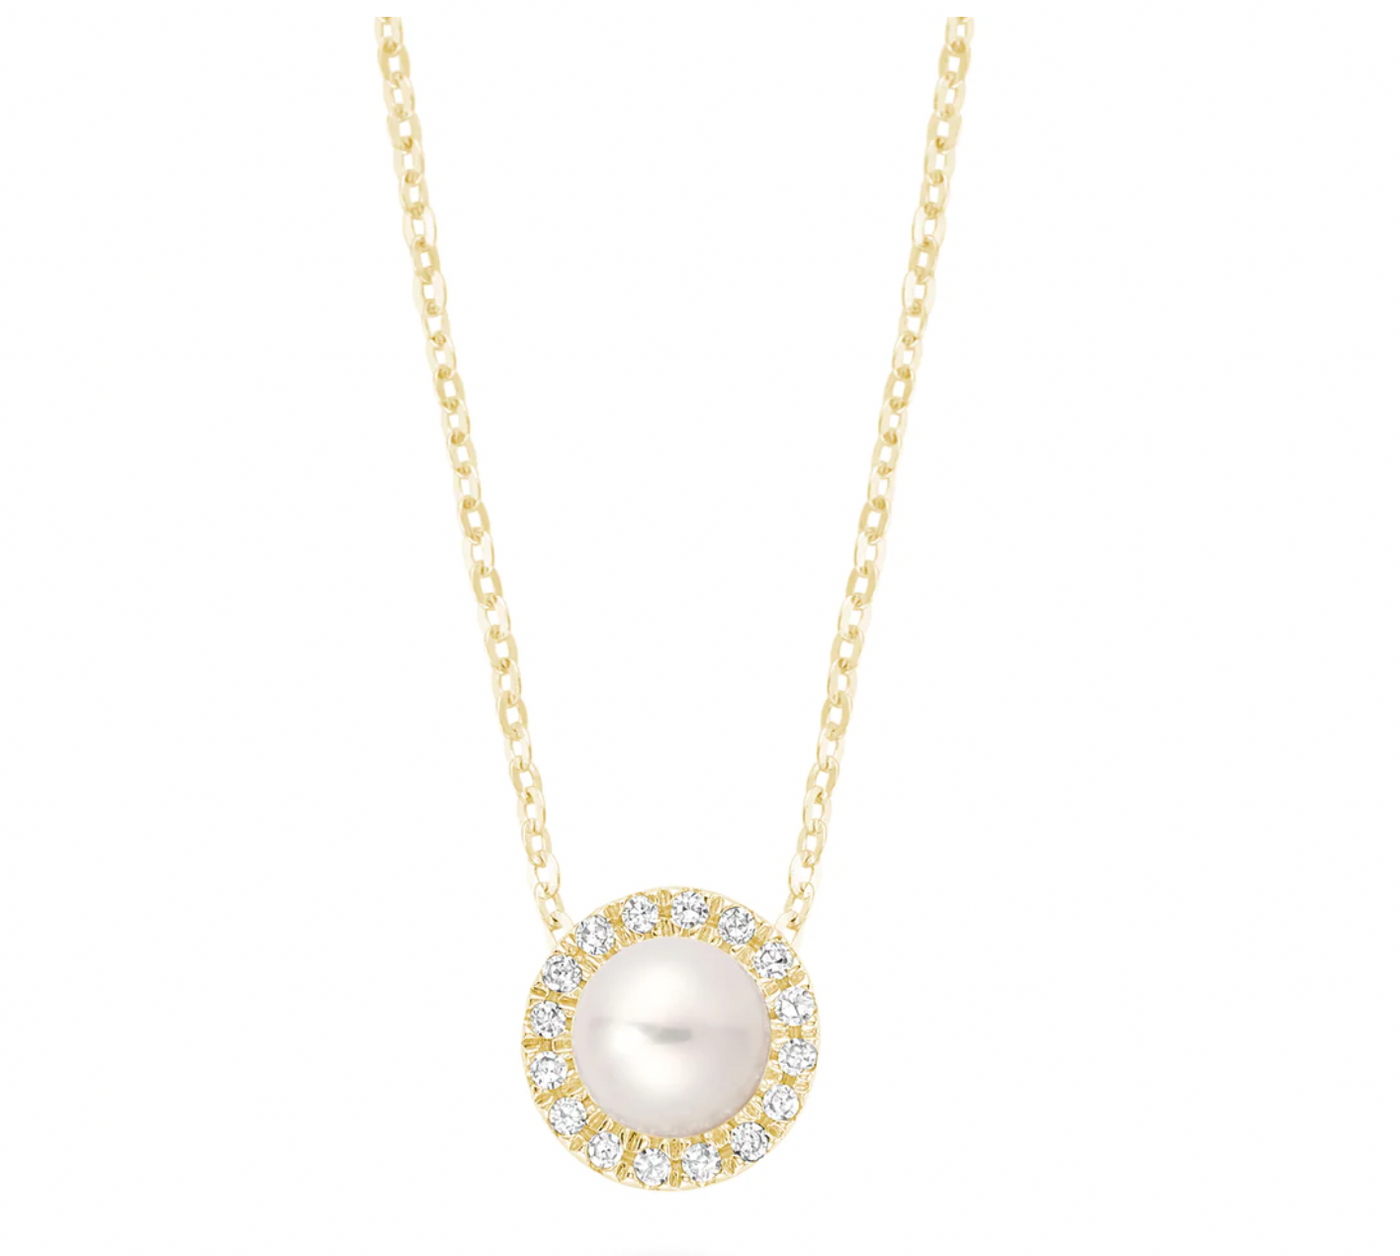 10 Karat Yellow Gold Pearl and Diamond Necklace